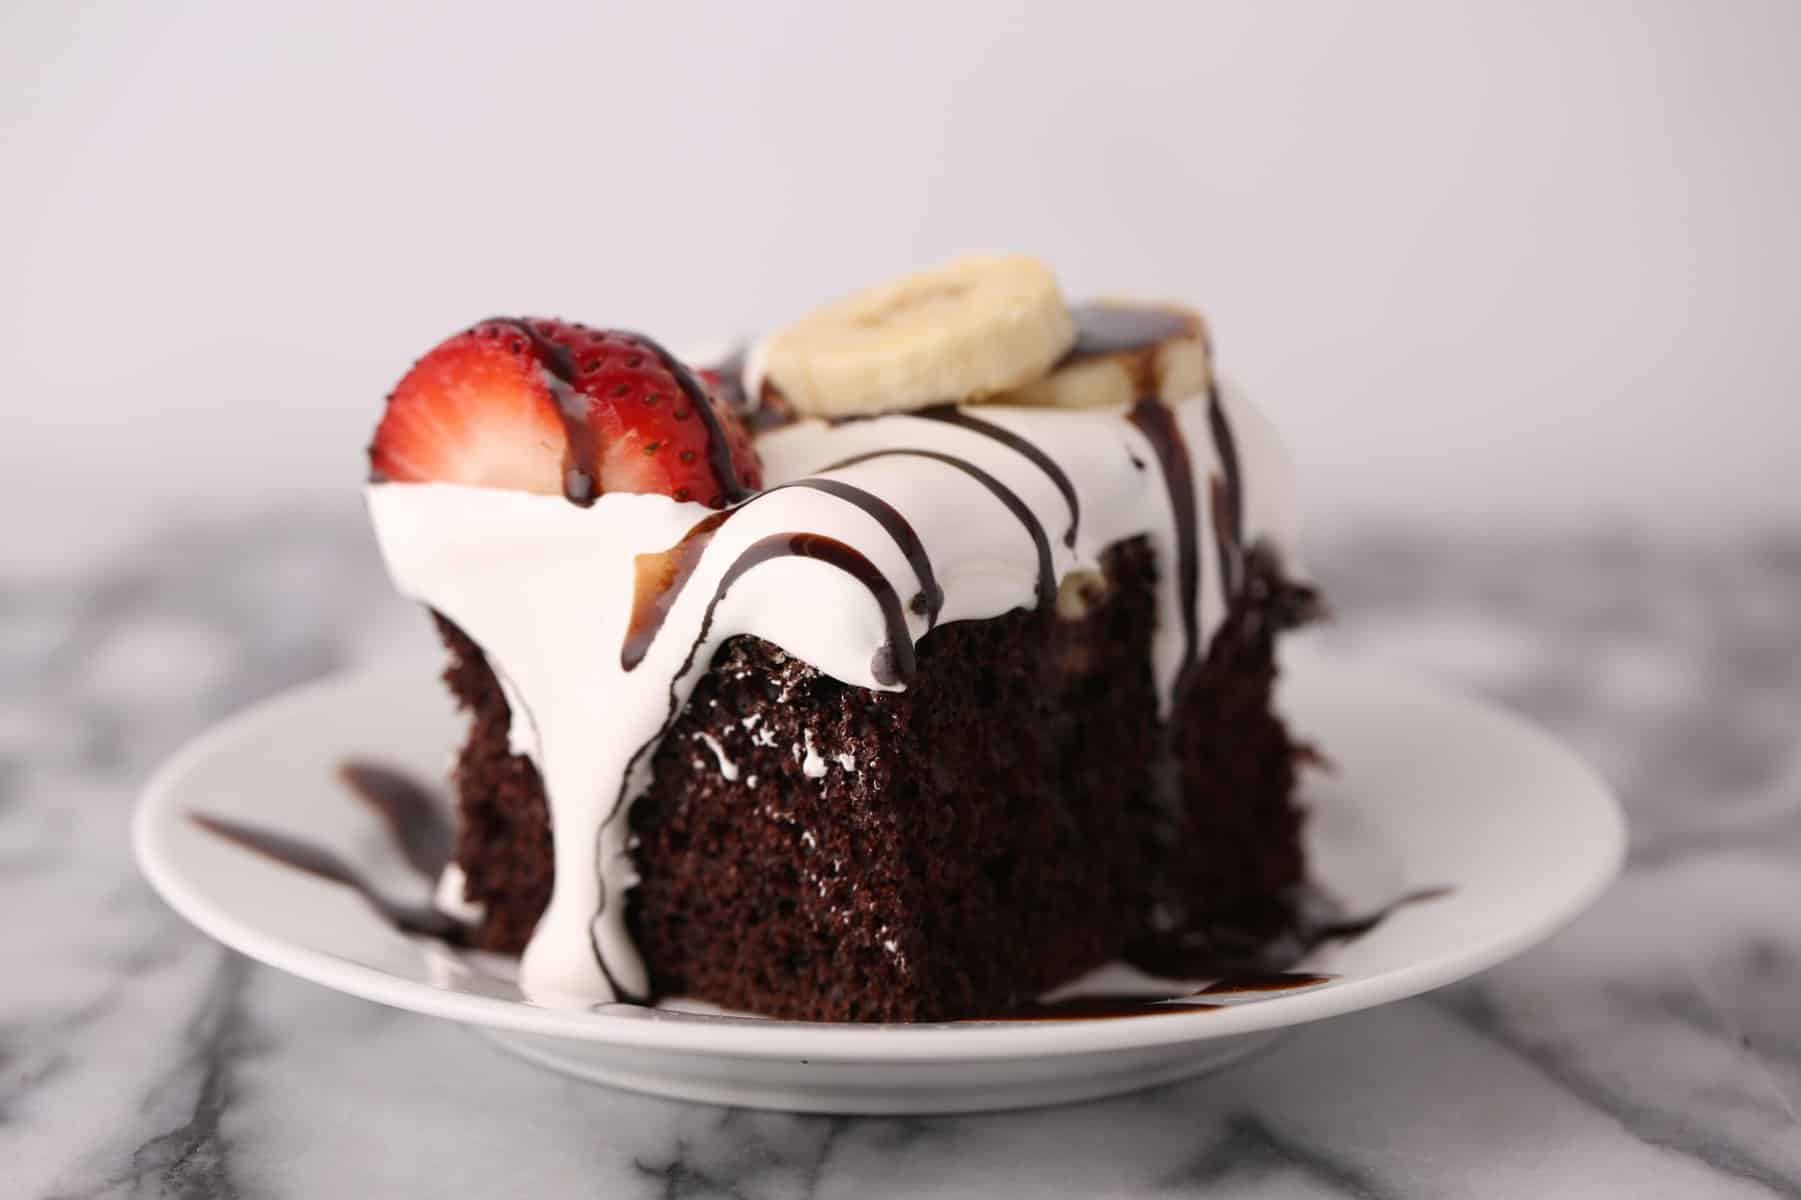  Chocolate lovers, this cake is for you!